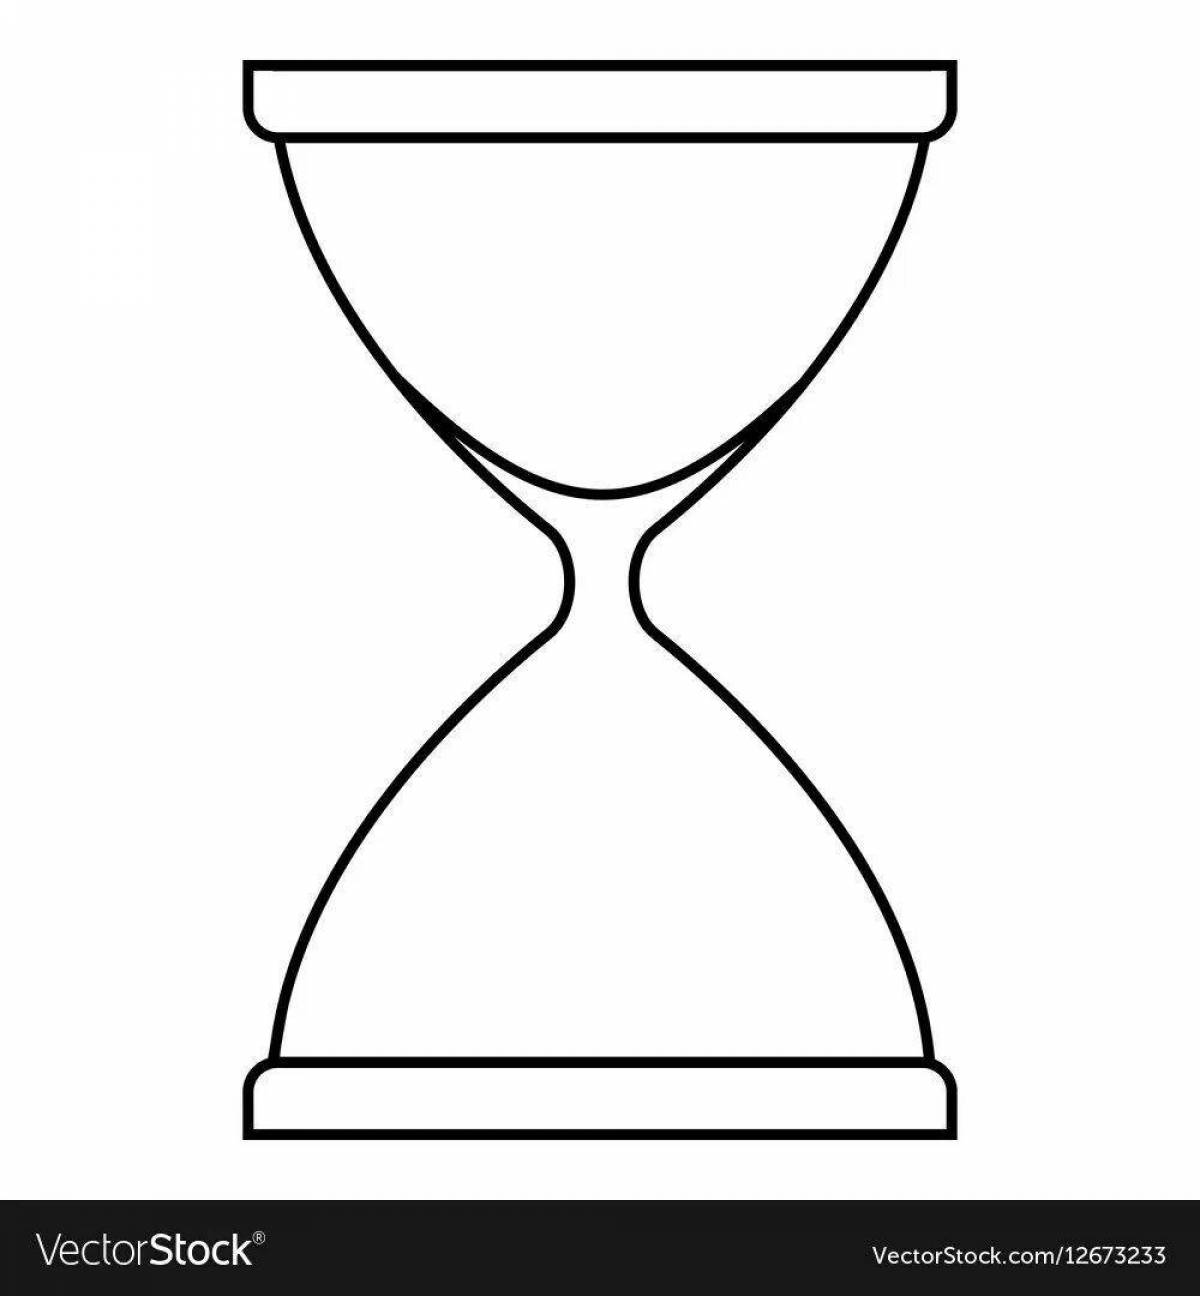 Flawless hourglass coloring page